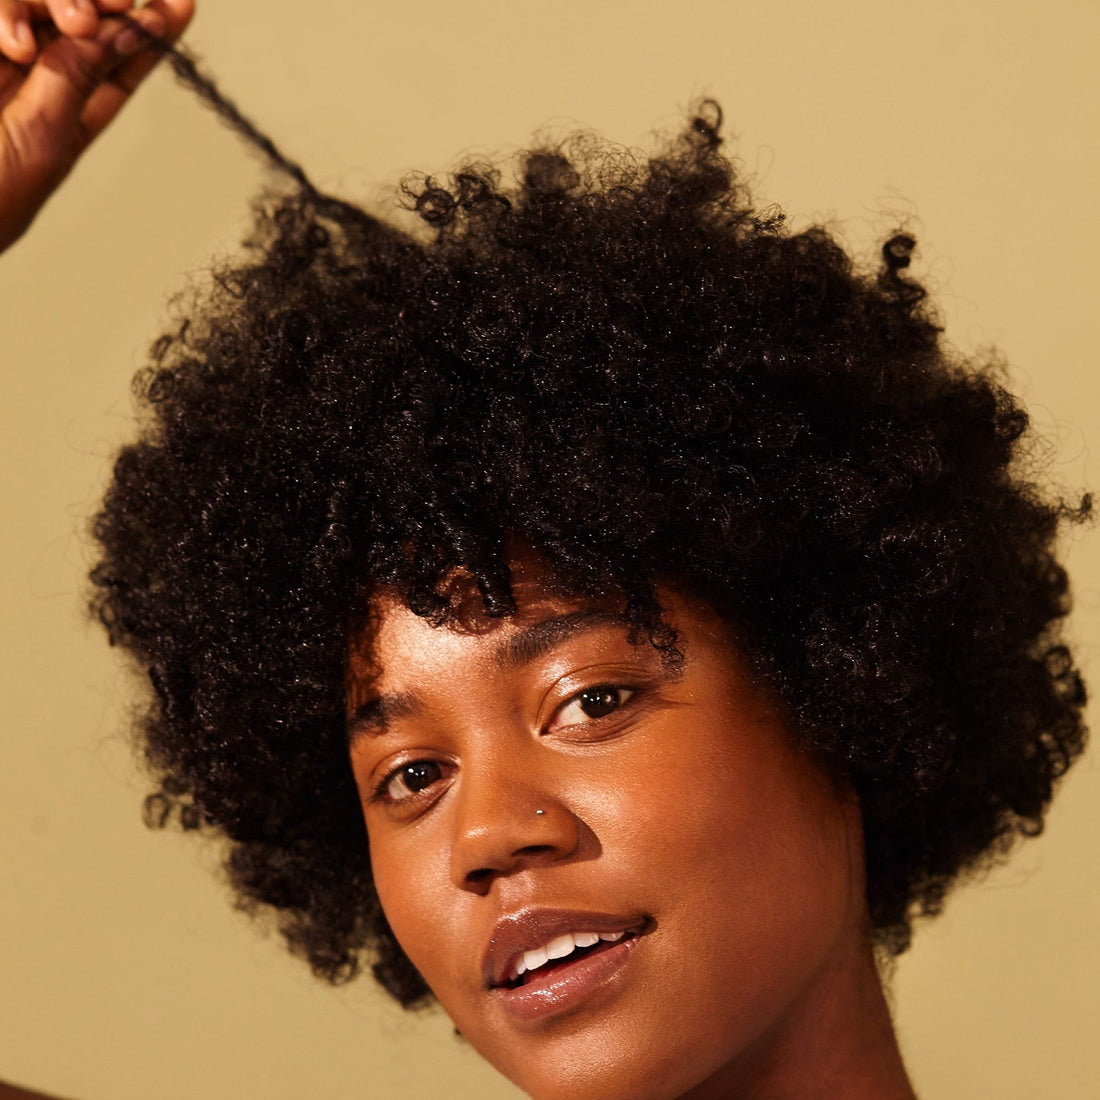 DON’T FALL FOR ANTI-SHRINKAGE OR ELONGATION PRODUCTS